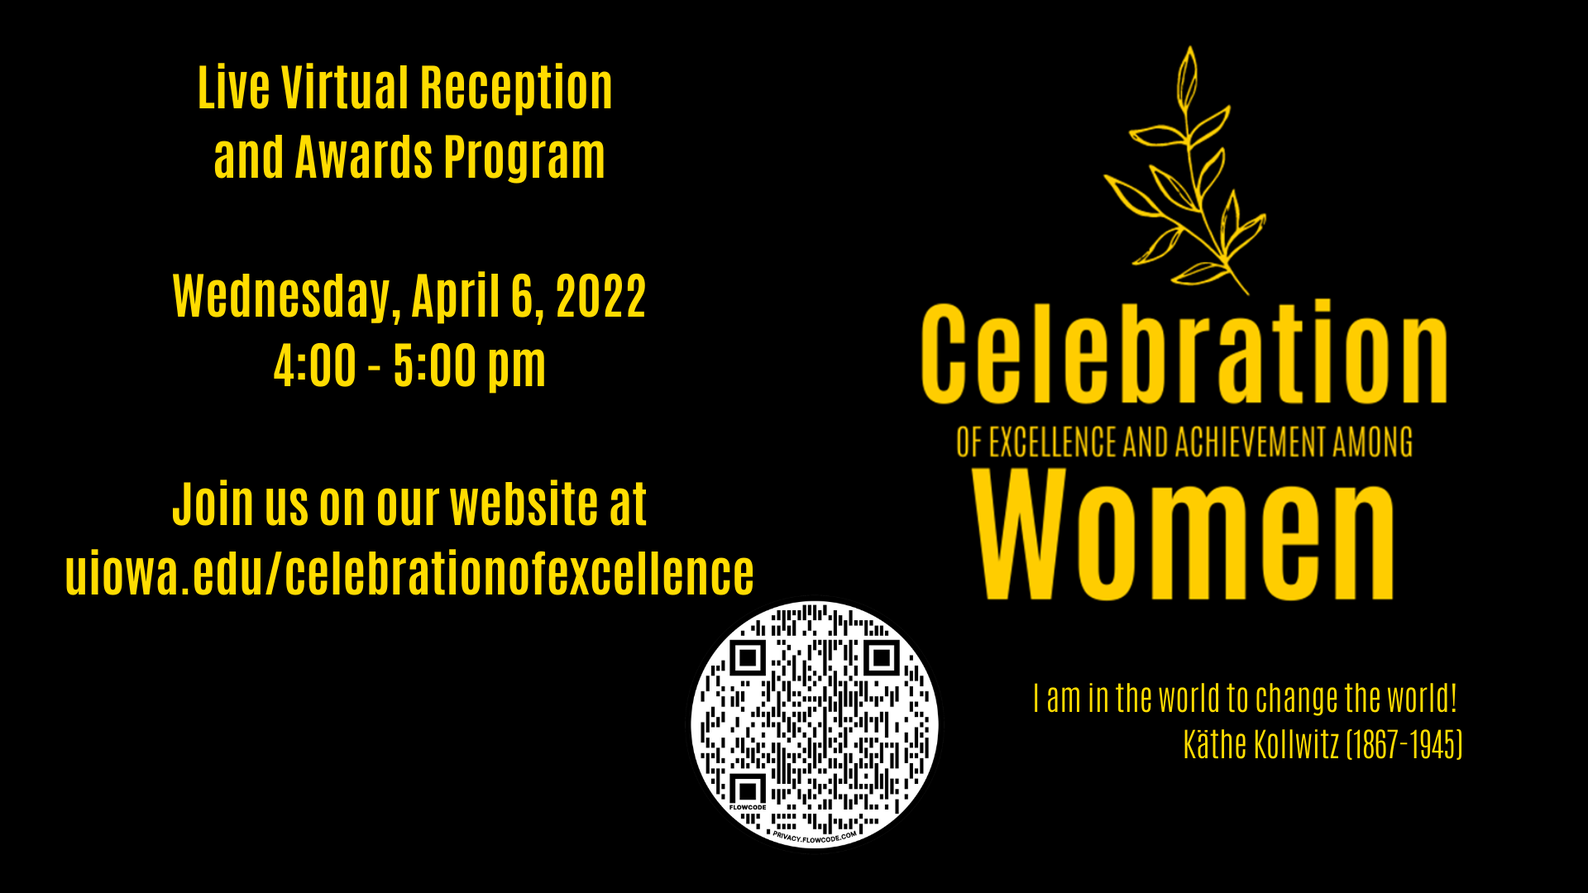 Celebration of Excellence and Achievement Among Women. Live Virtual Reception and awards program is on Wednesday, April 6 2022 from 4-5pm. Join us at our website at uiowa.edu/celebrationofexcellence I am in the World to Change the World!